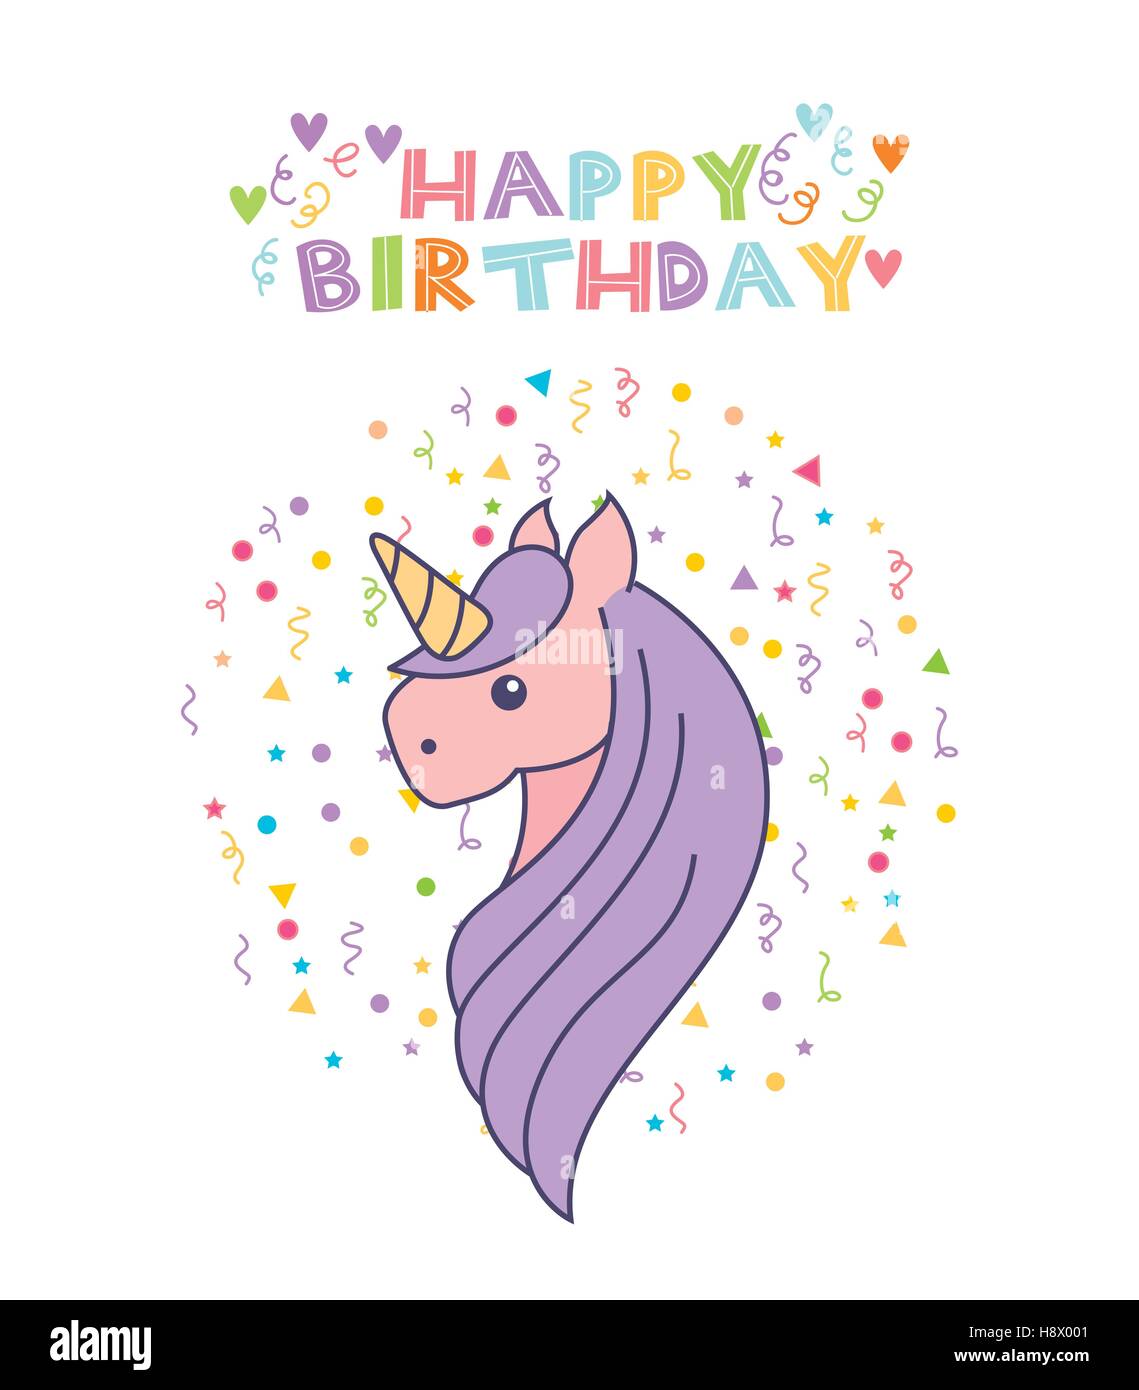 happy birthday card with cute unicorn icon over white background ...